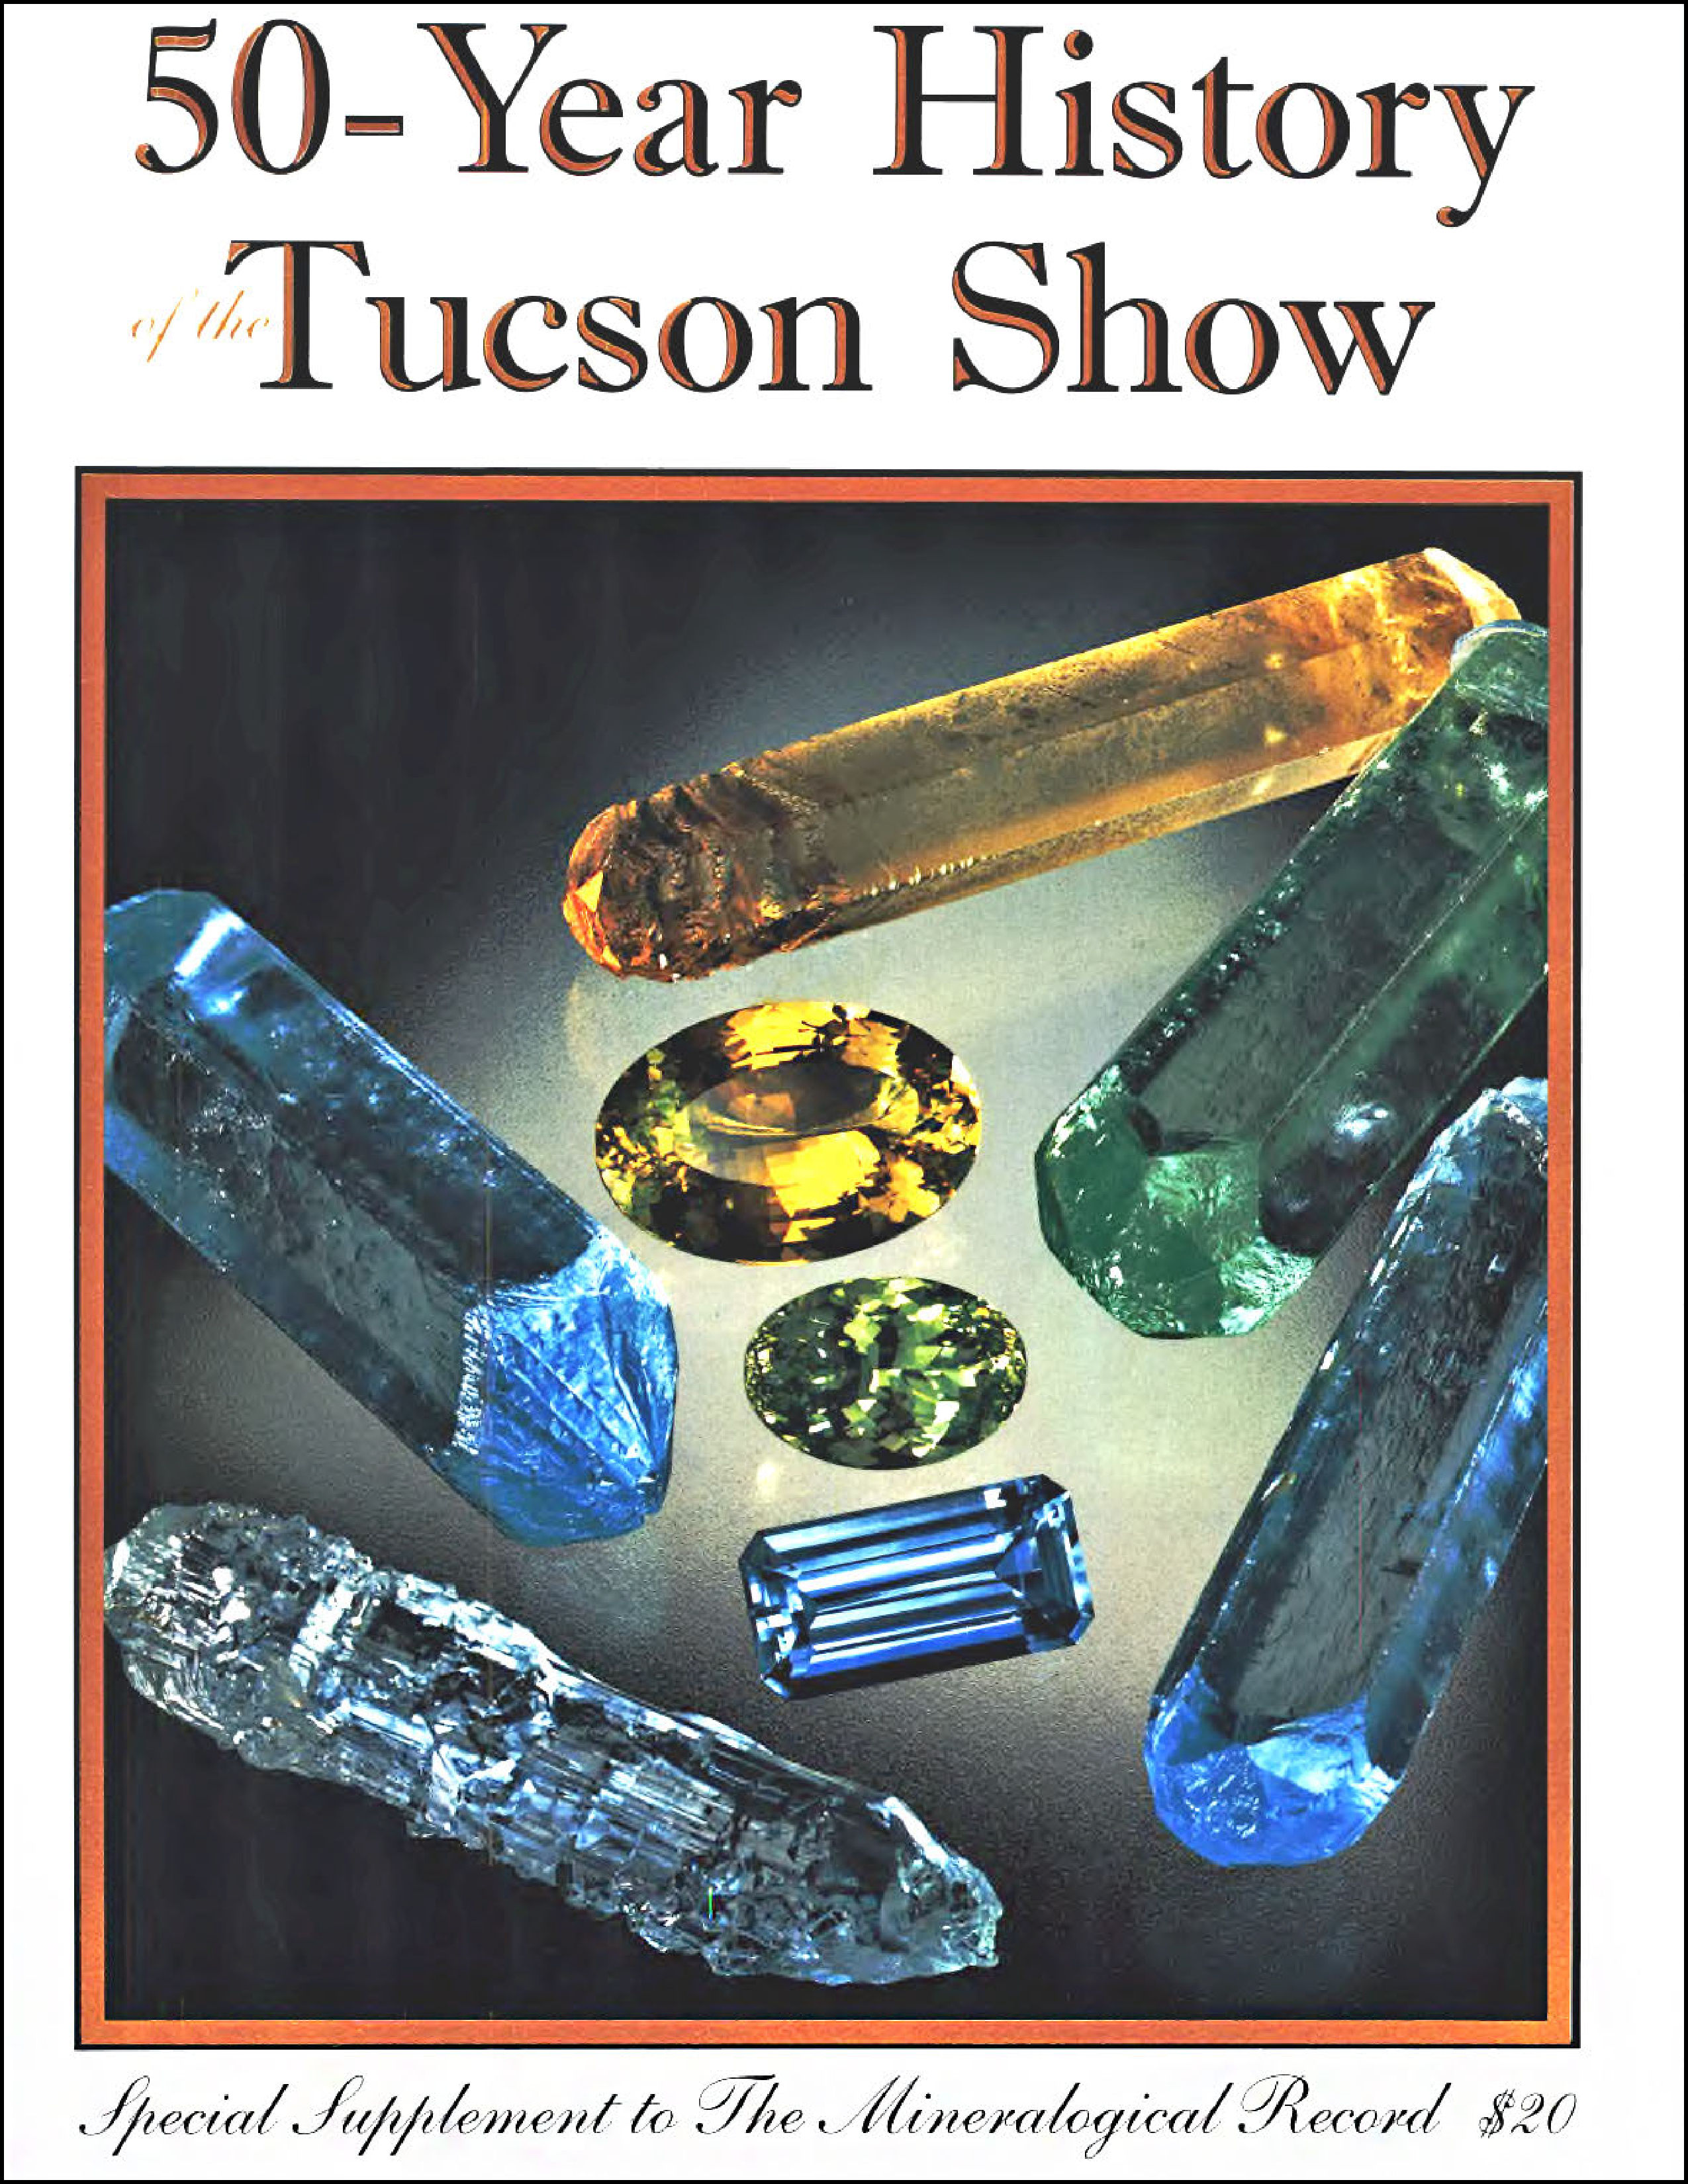 A 50 yr History of the Tucson Show, special sup 2004, Vol 35 no 7